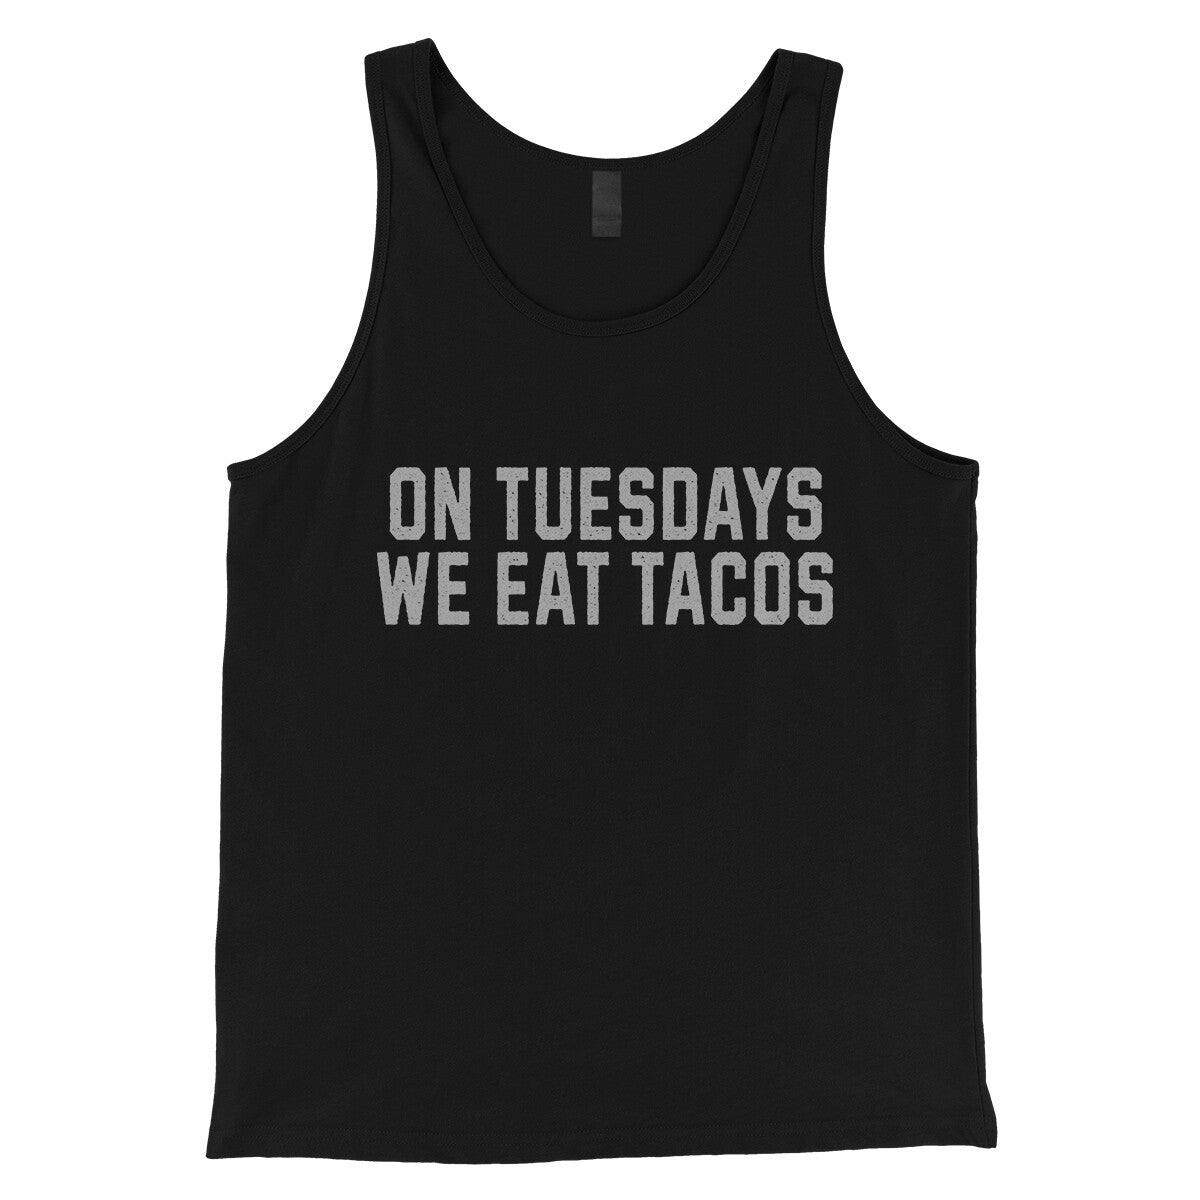 On Tuesdays We Eat Tacos in Black Color